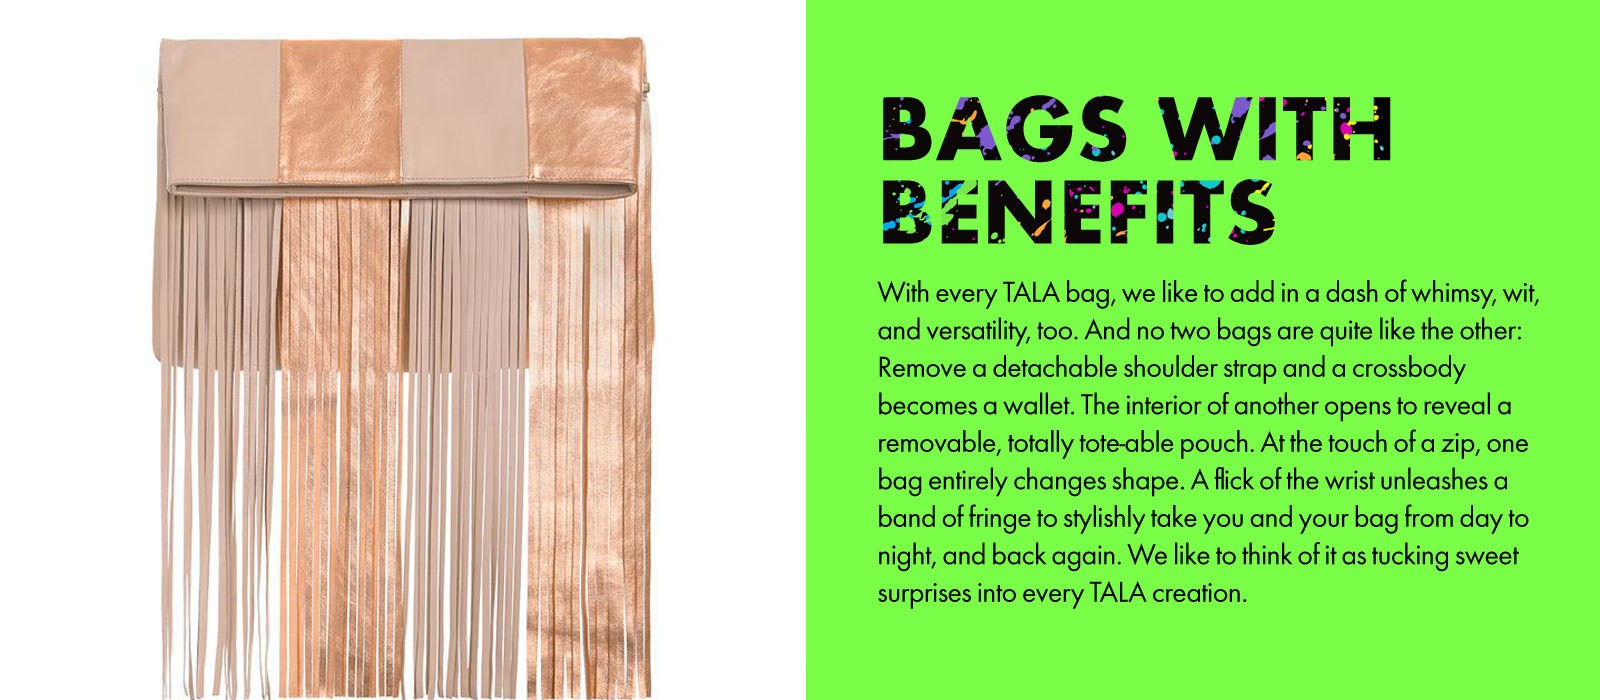 Bags with Benefits